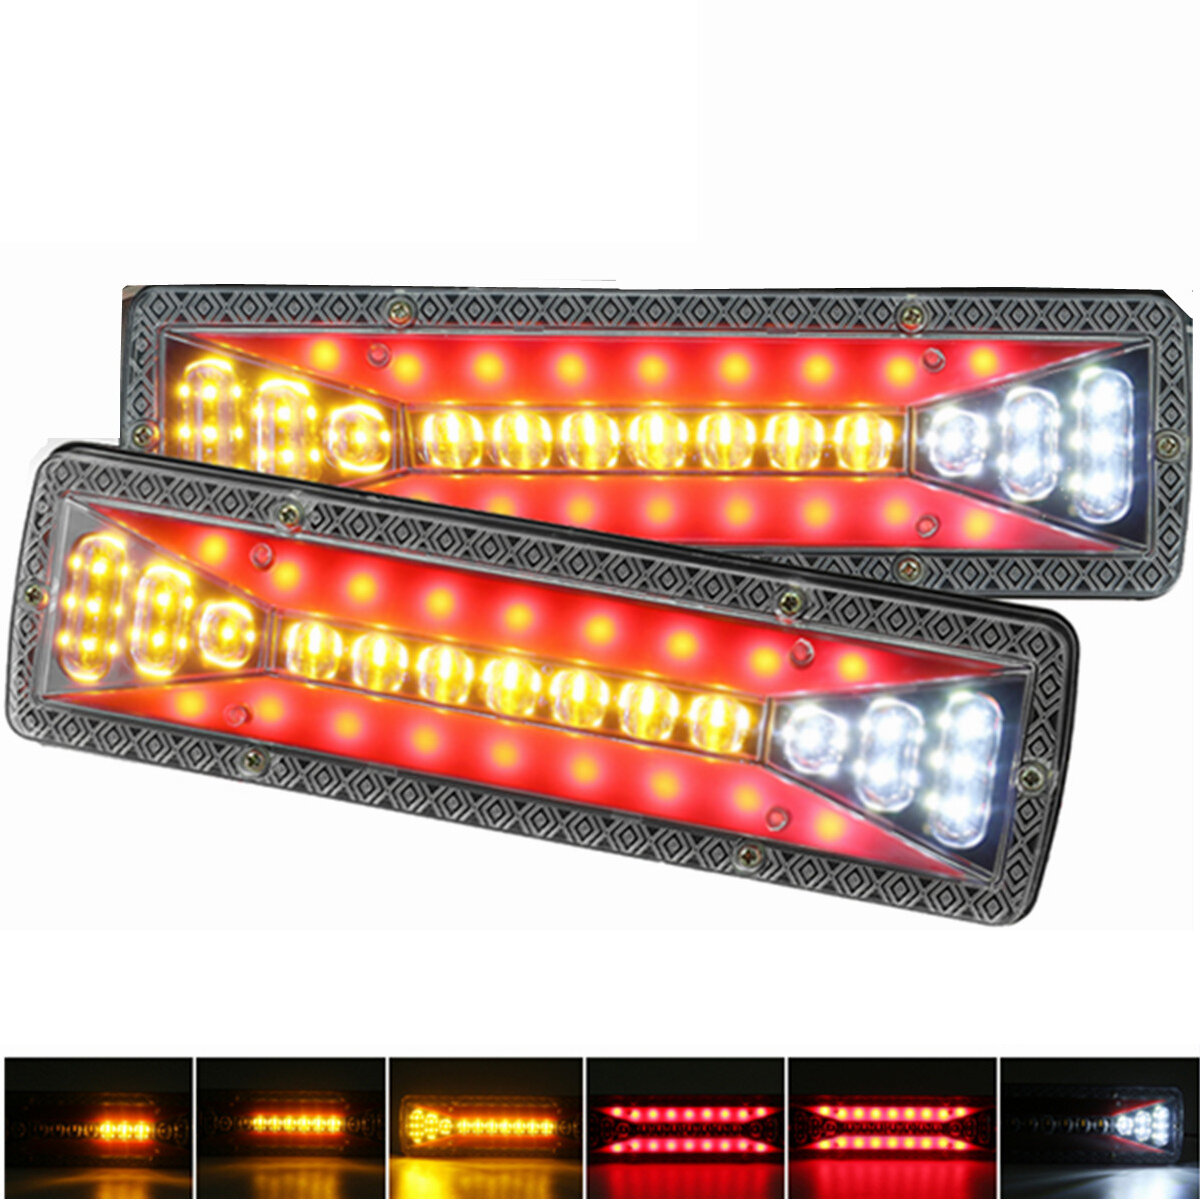 best price,2pcs,12v,37led,flowing,rear,tail,light,discount